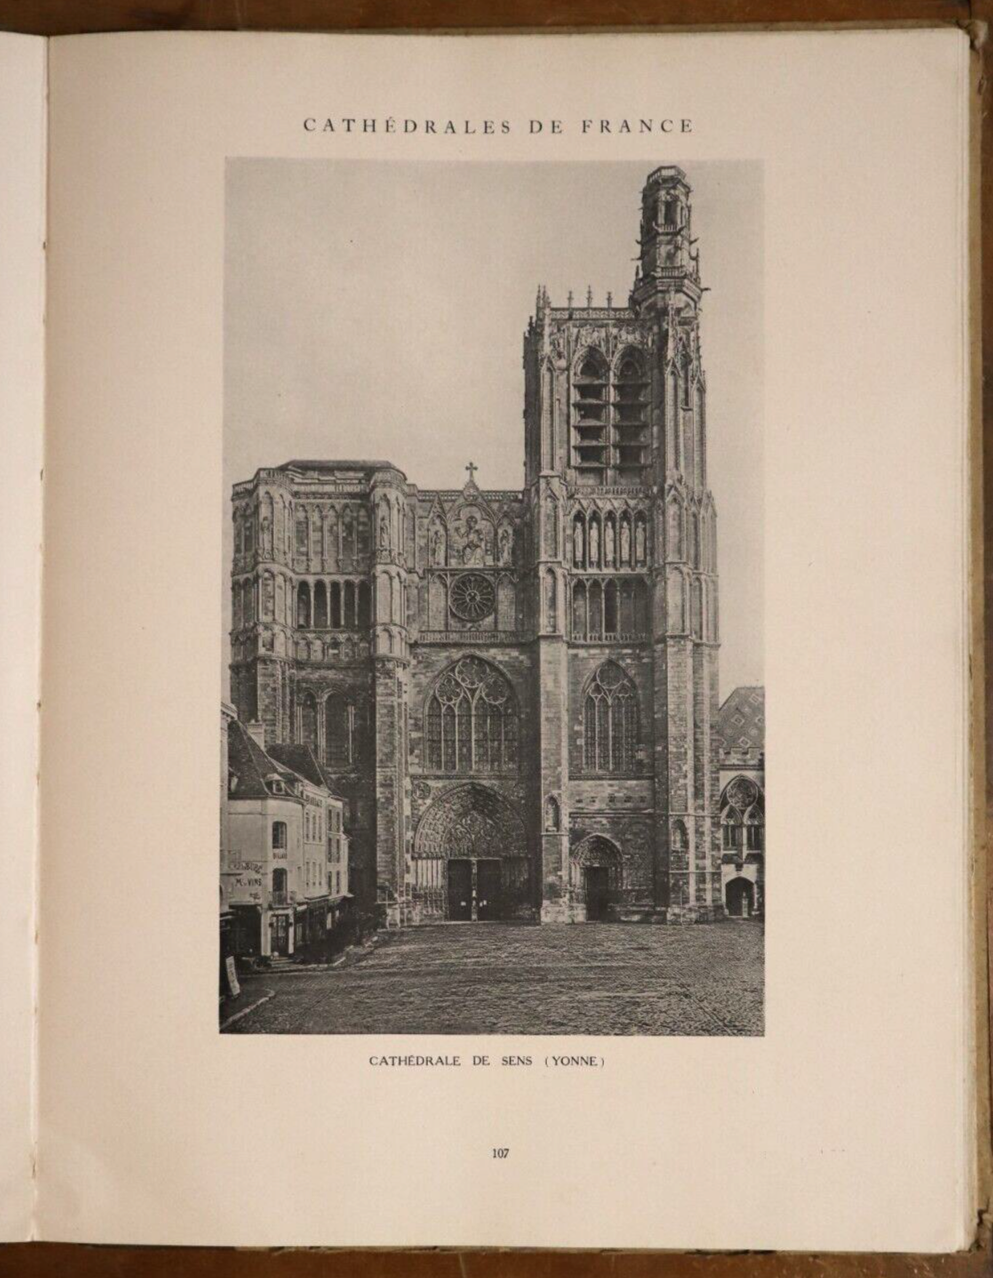 1924 Selected Monuments of French Gothic Architecture 1st Edition Reference Book